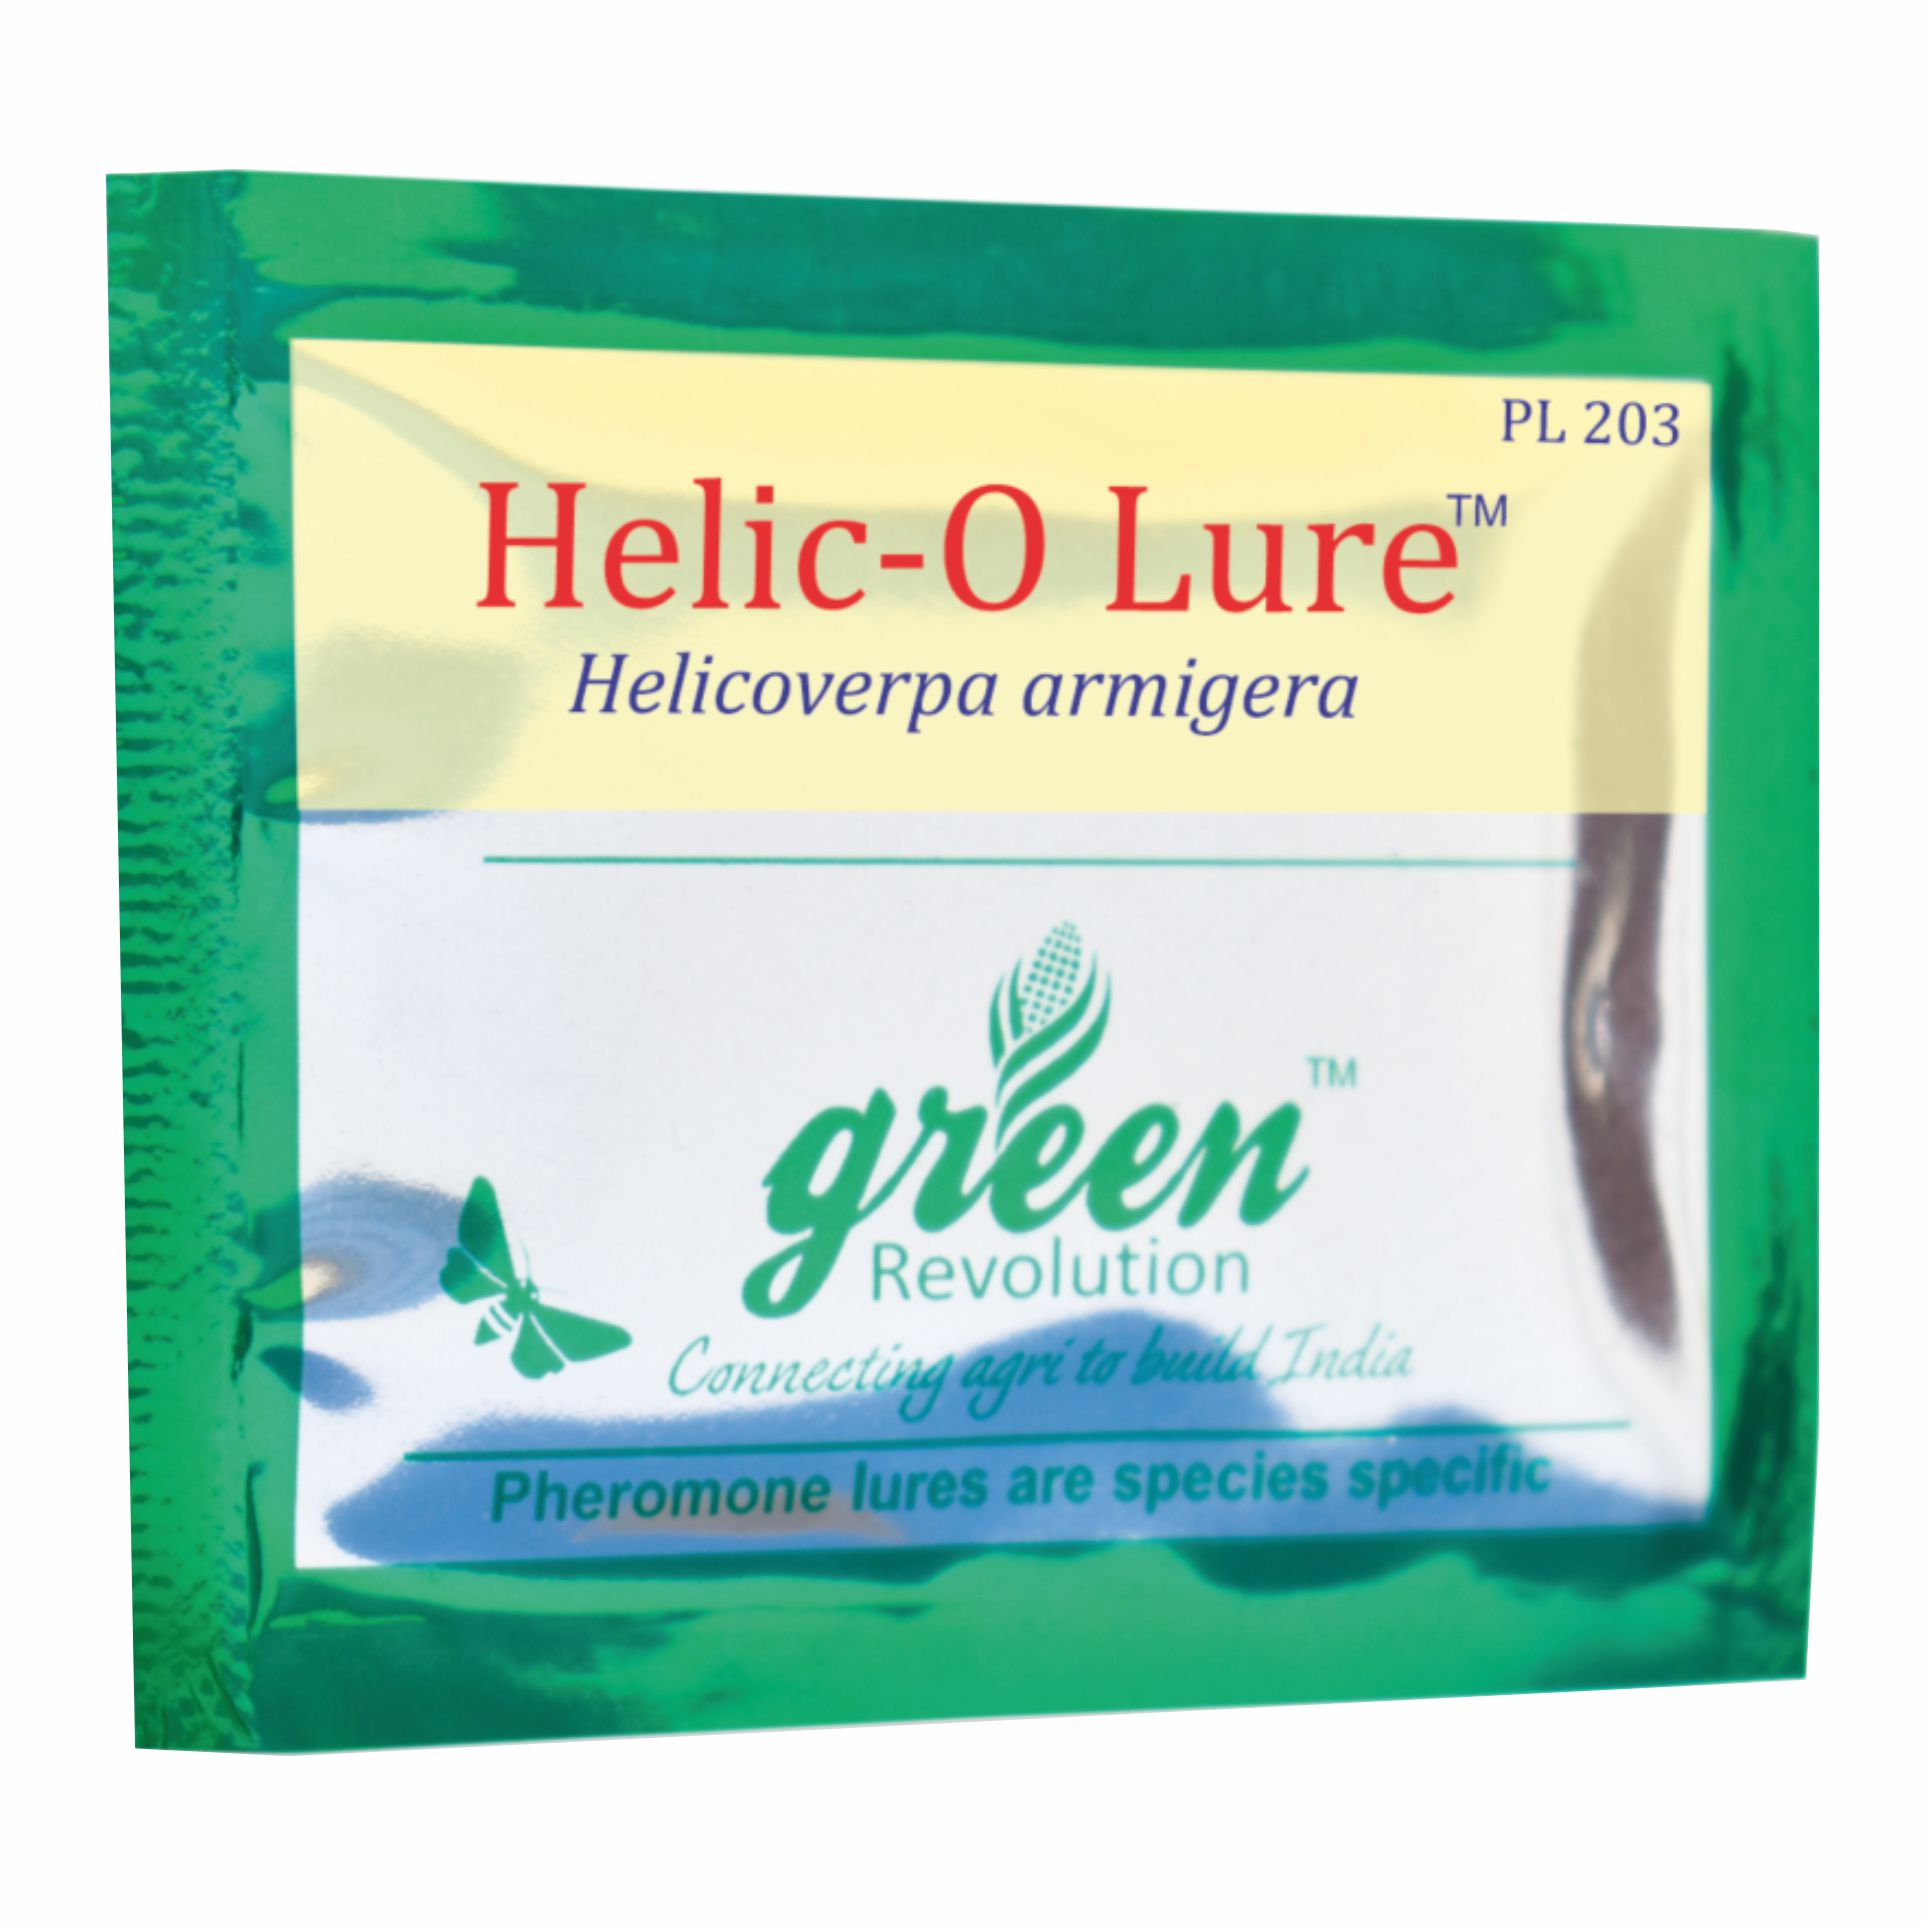 Helic-O Lure Helicoverpa armigera ( Pack of 10 )